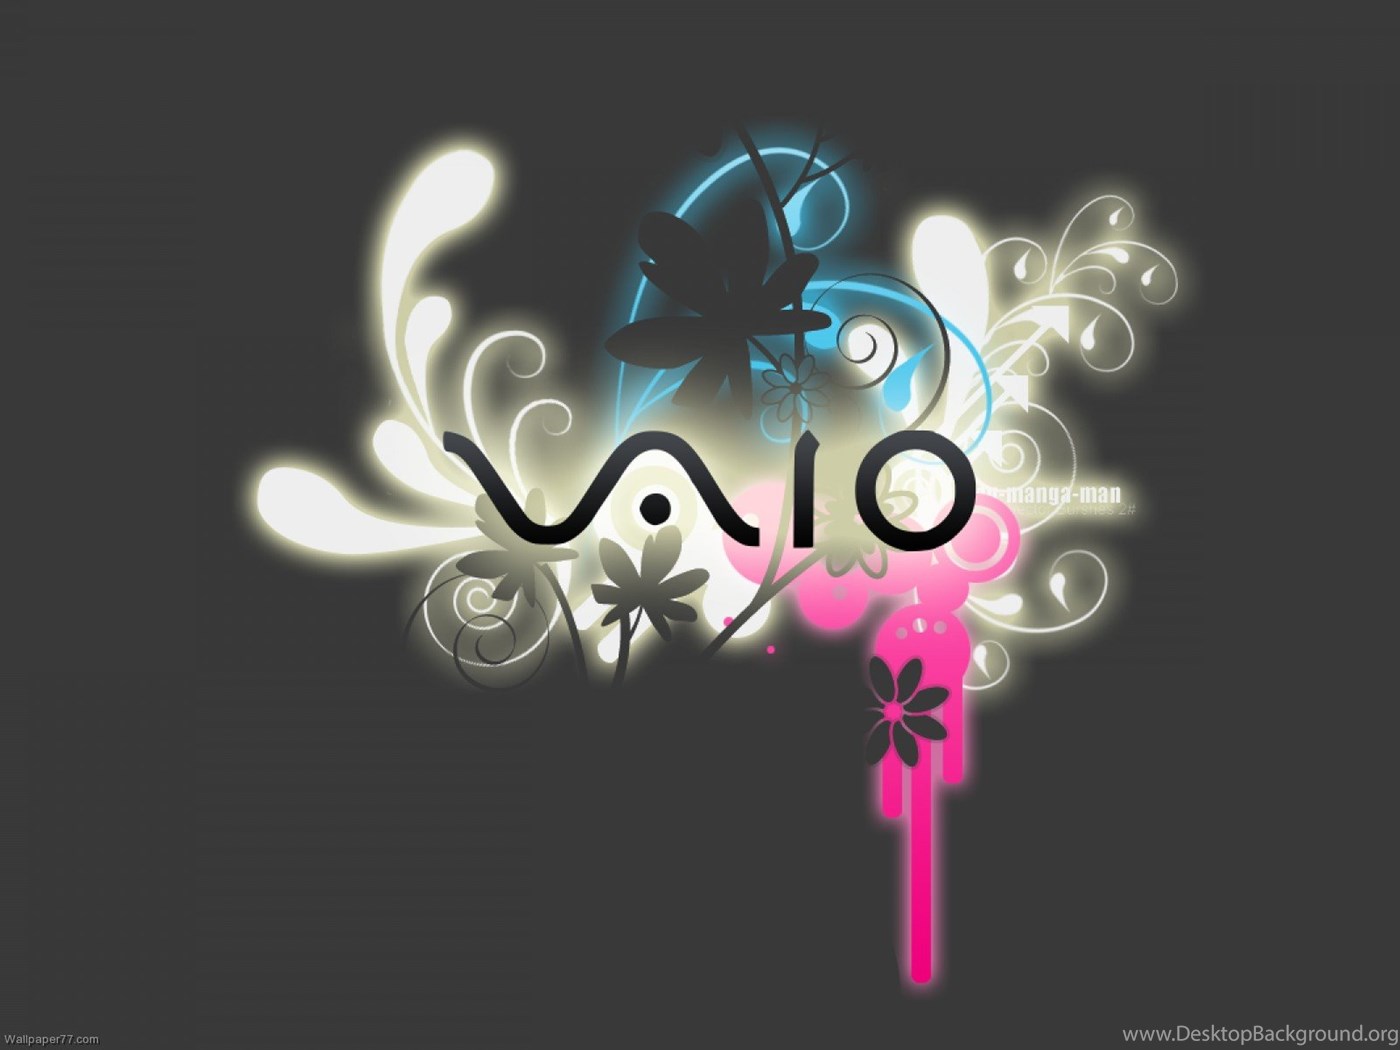 Hd Sony Vaio Wallpapers Vaio Backgrounds For Free Download Desktop Background